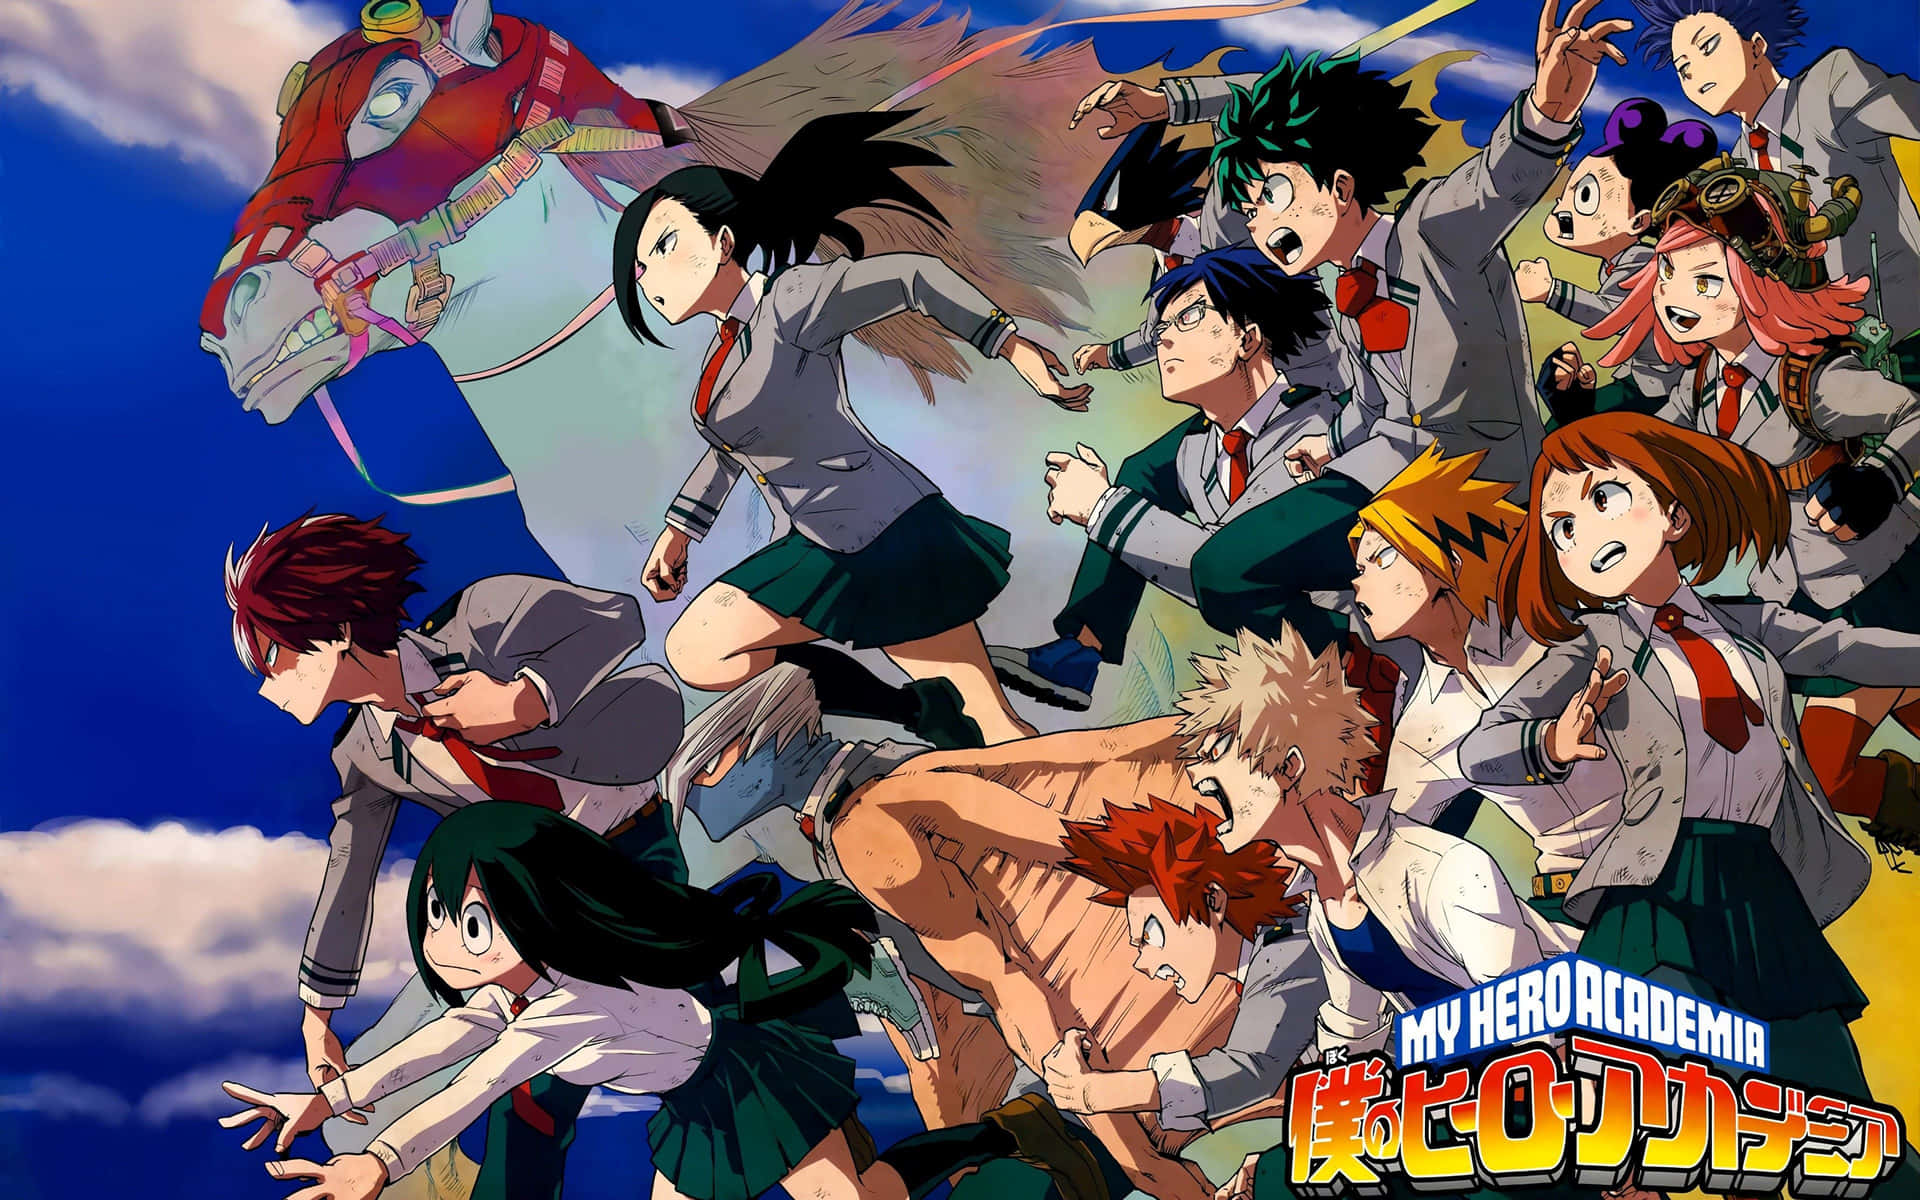 "Stay Connected with My Hero Academia on Your Laptop!" Wallpaper